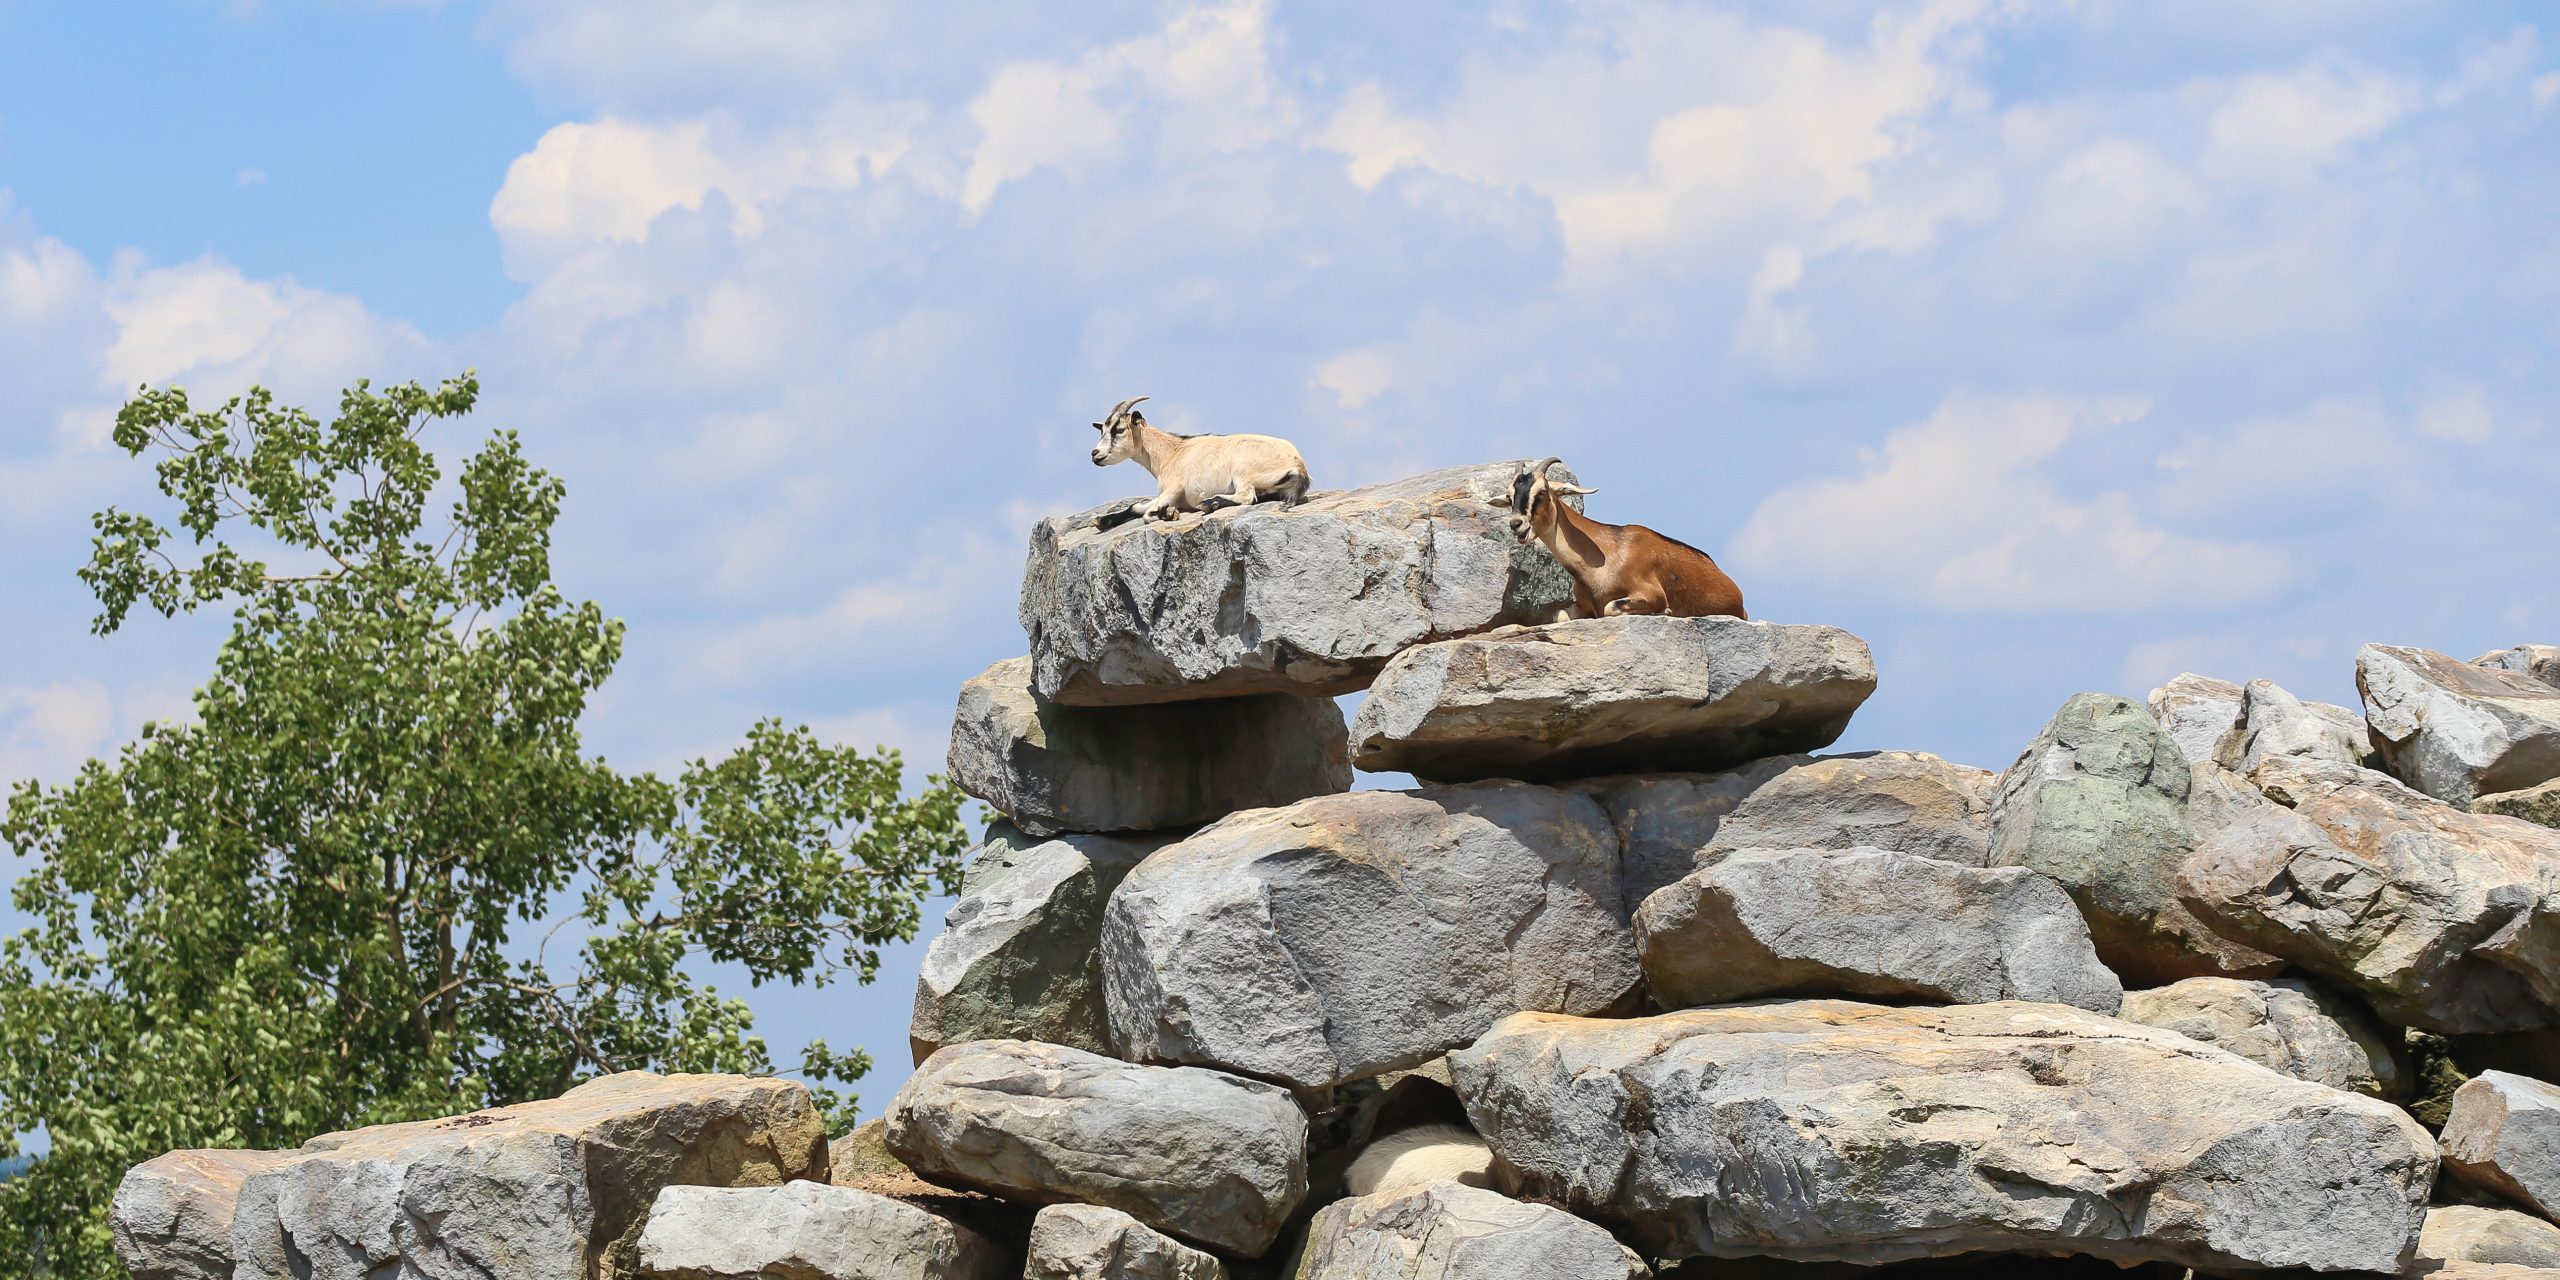 Goats perched on some rocks